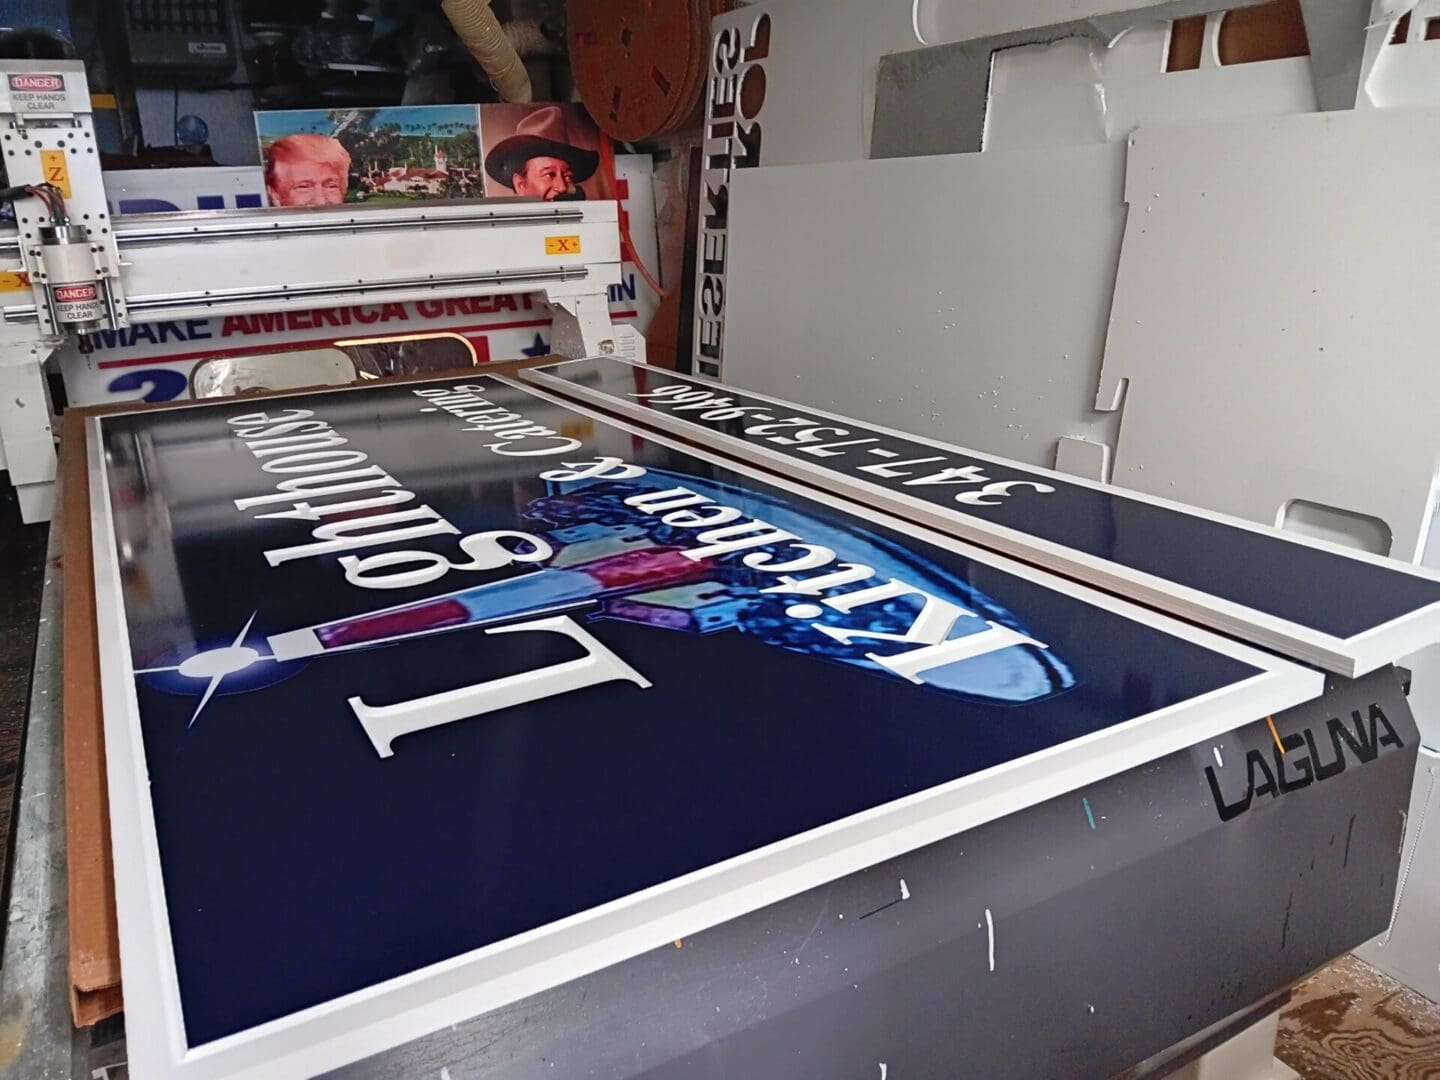 A large printer is working on the printing process.